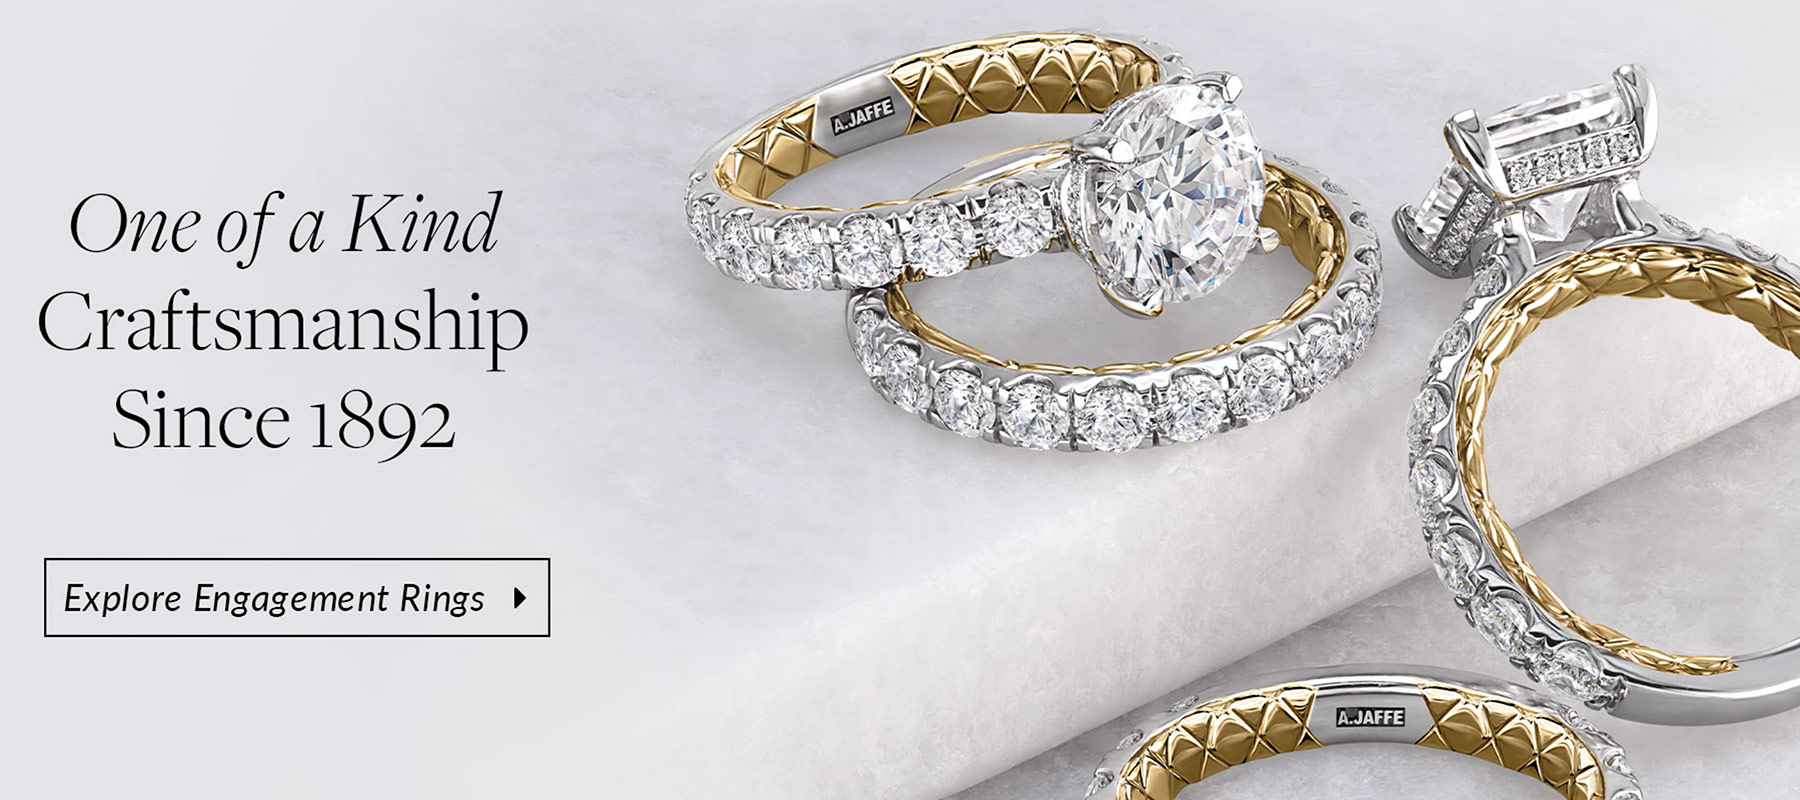 Royal Jewelers Fargo Jewelry, Engagement Rings, and Watches